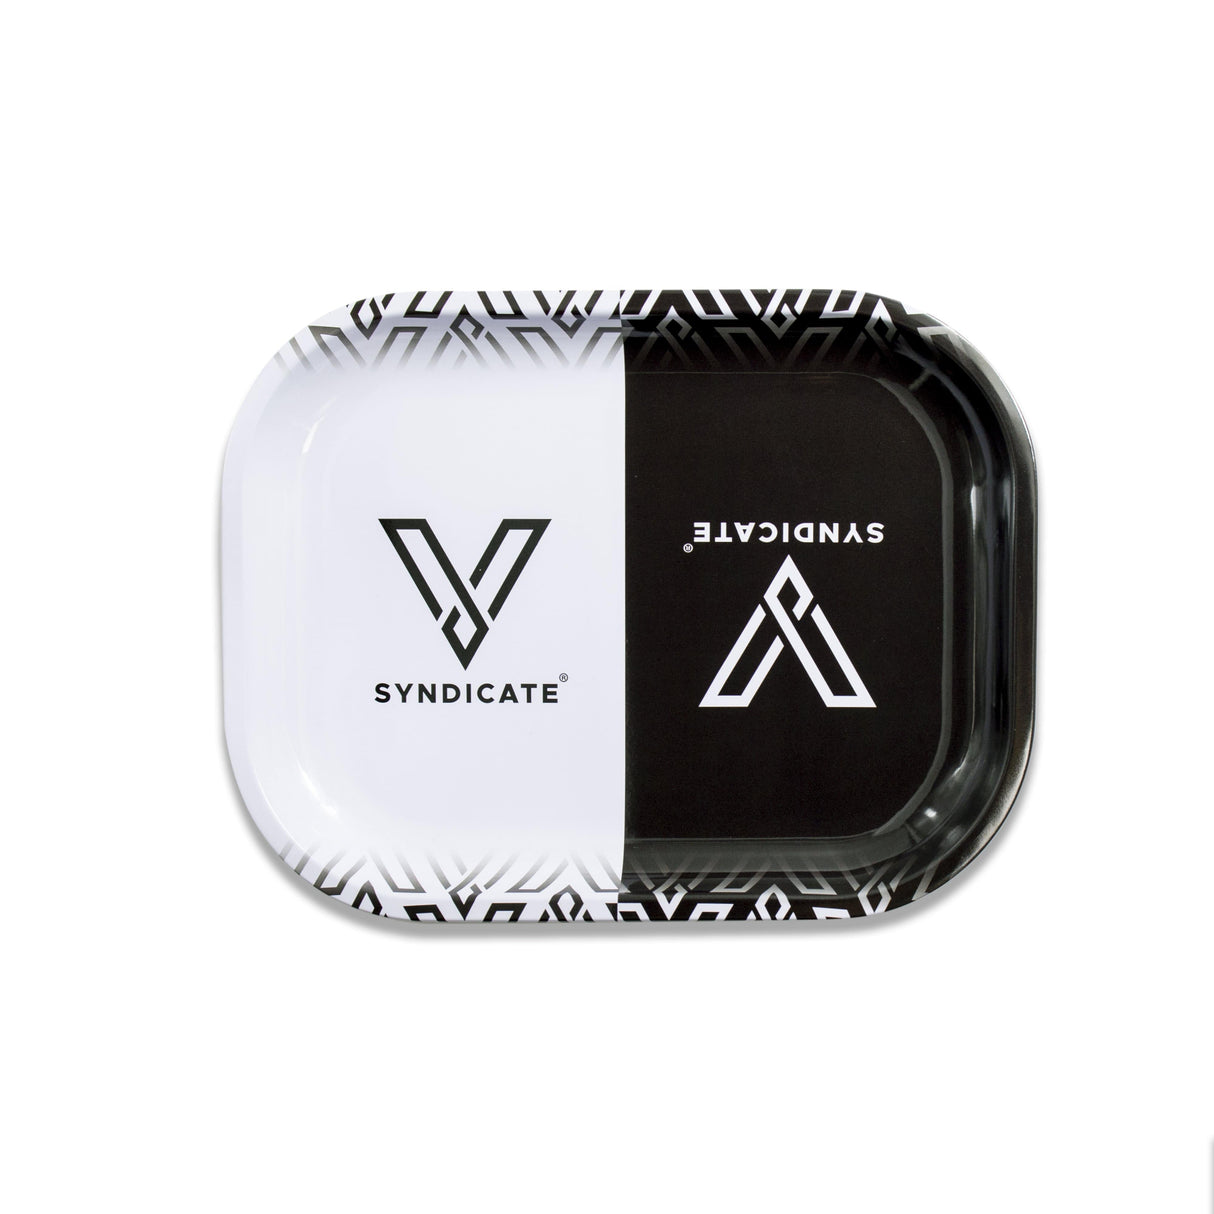 V Syndicate Hybrid Rollin' Tray in black, white, and gray, top view, compact and portable design